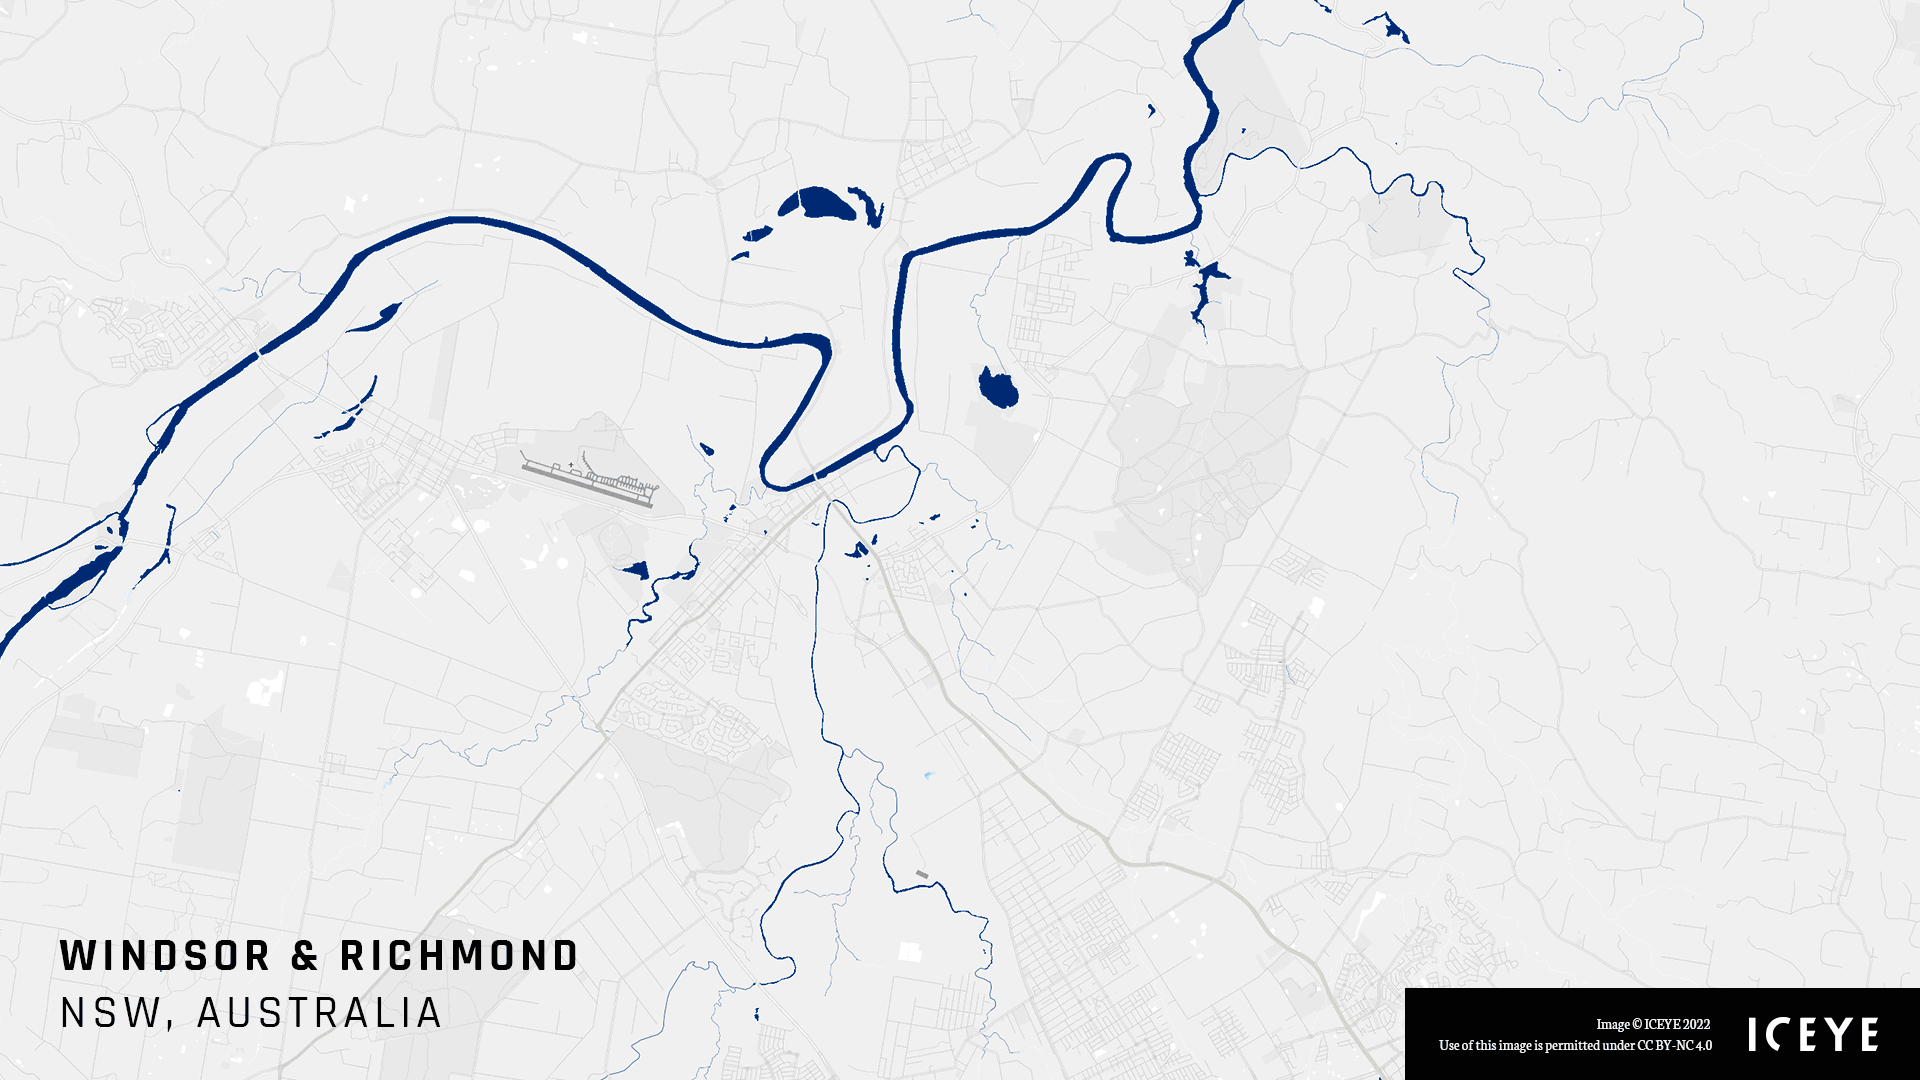 Before and after imagery of flooding in the Windsor and Richmond areas of New South Wales.